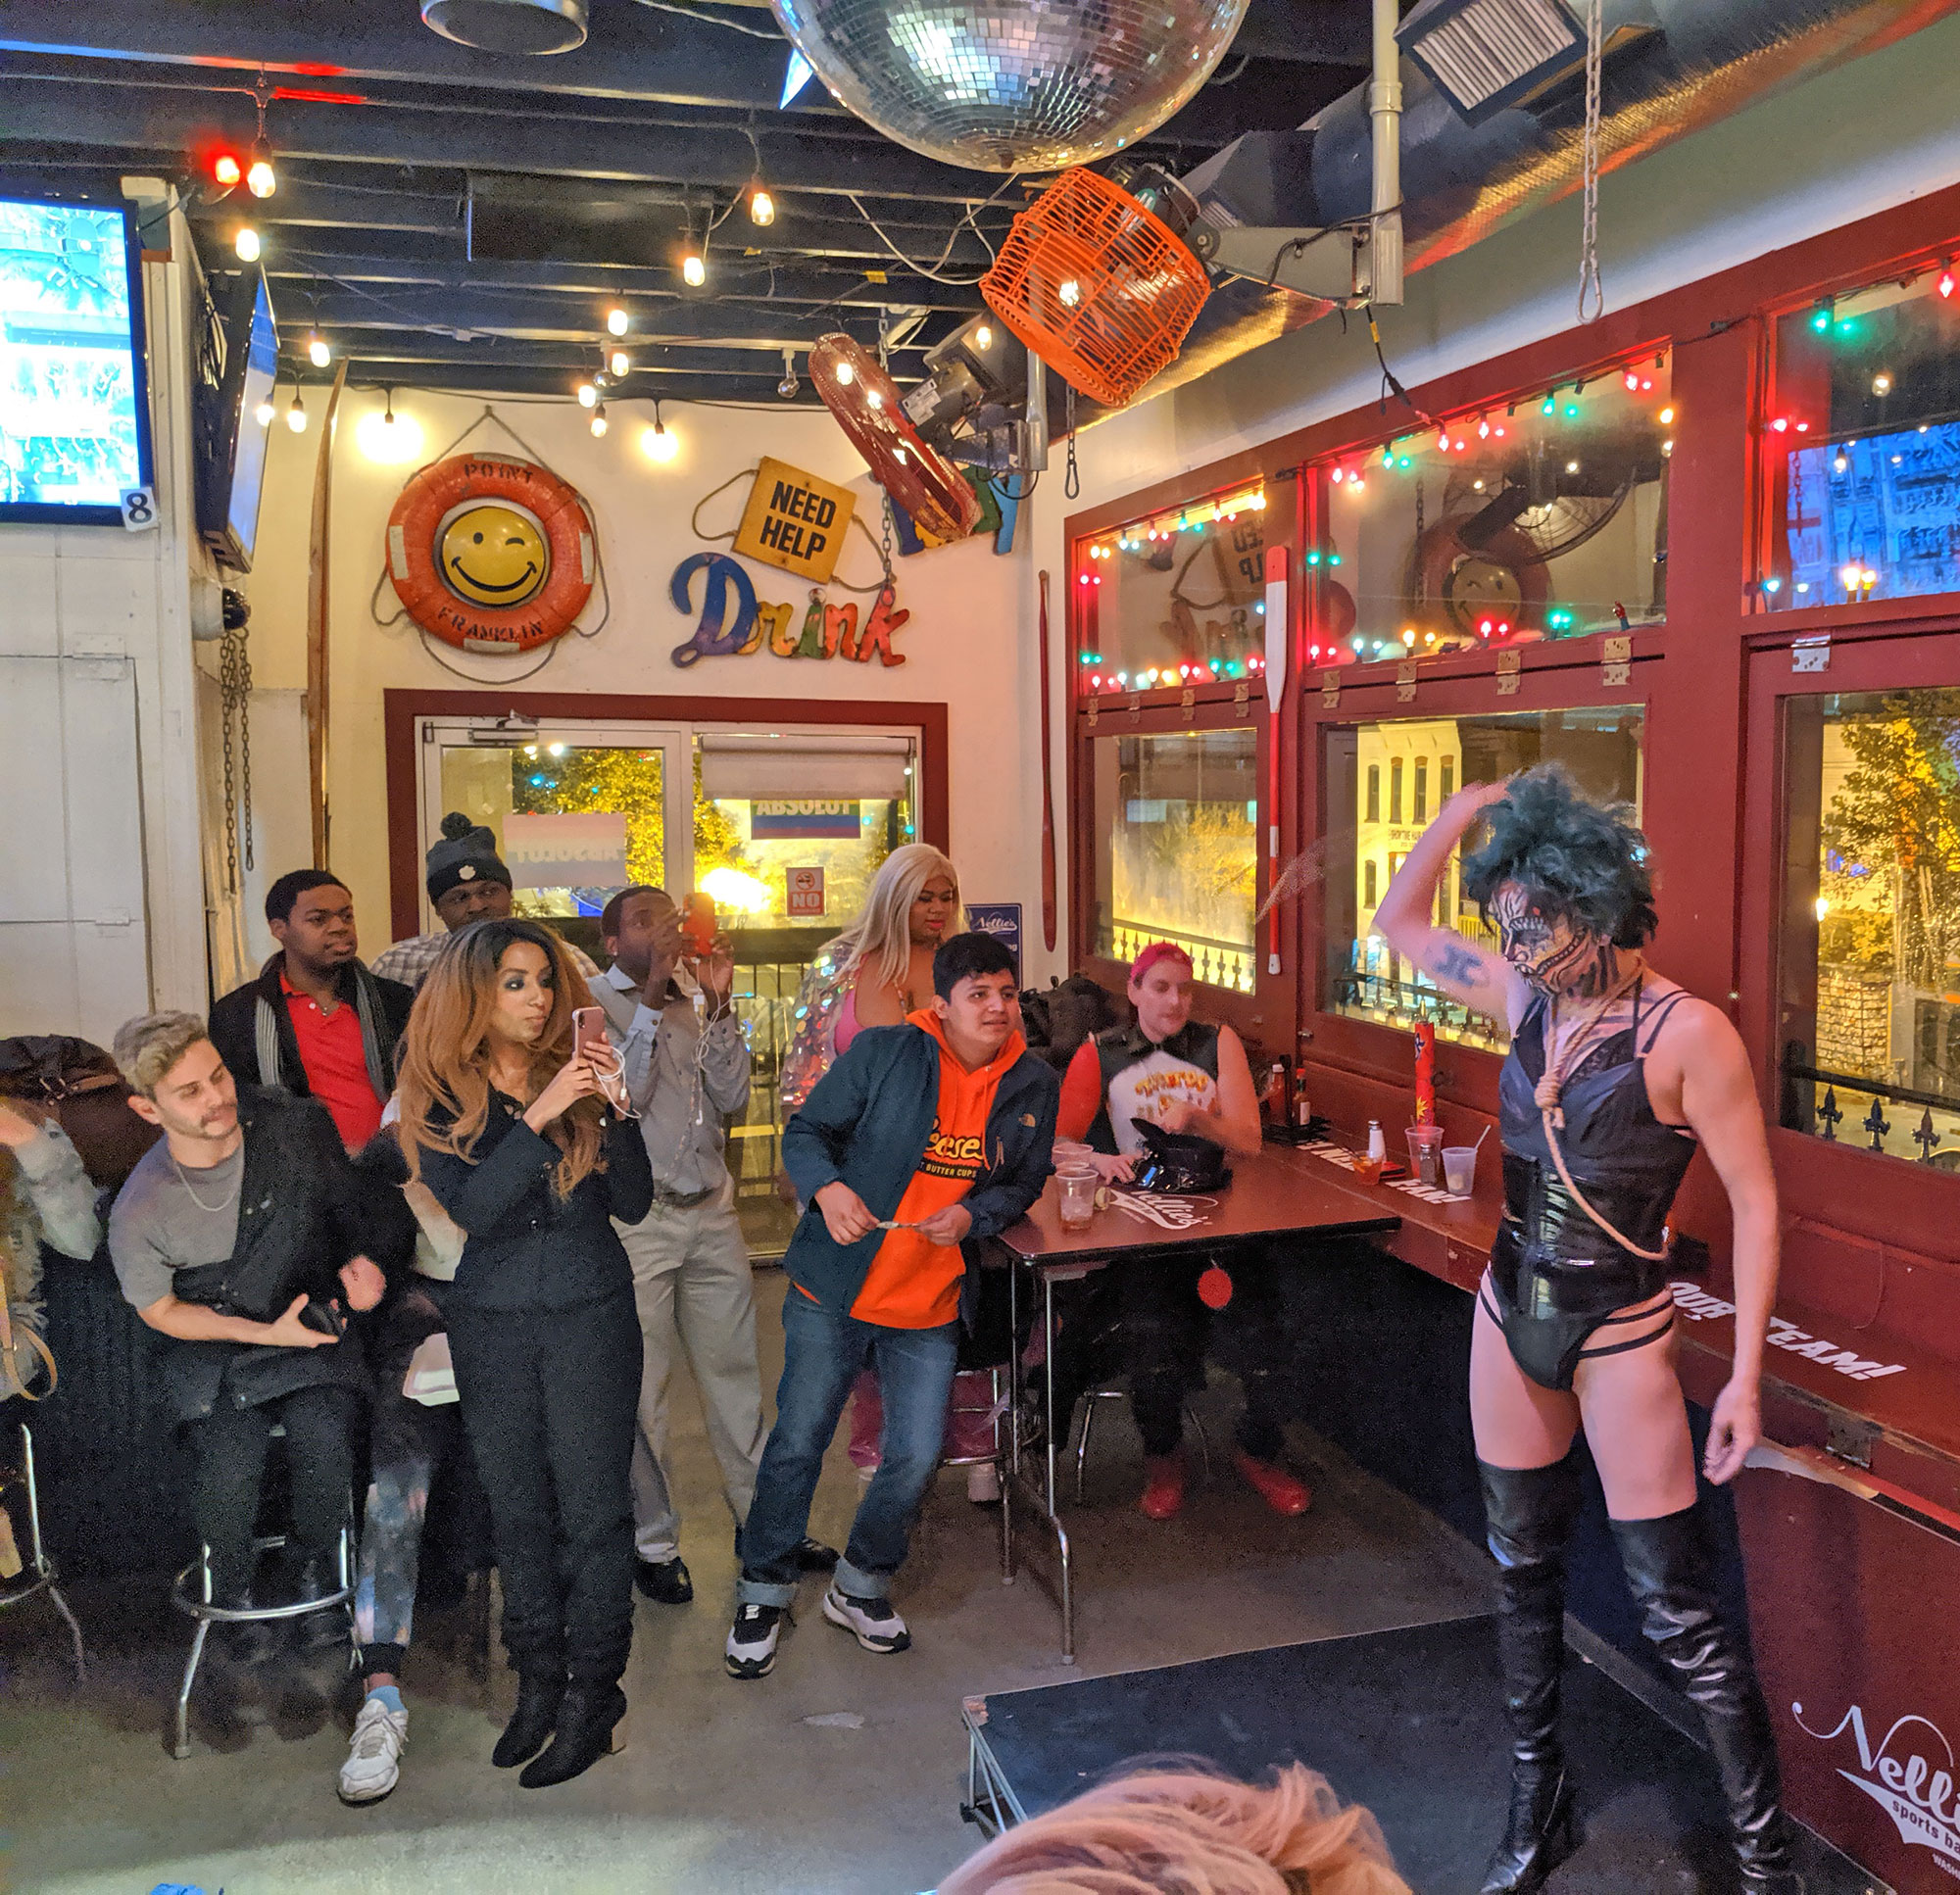 A drag performer at Nellie's Sports Bar in Washington DC.